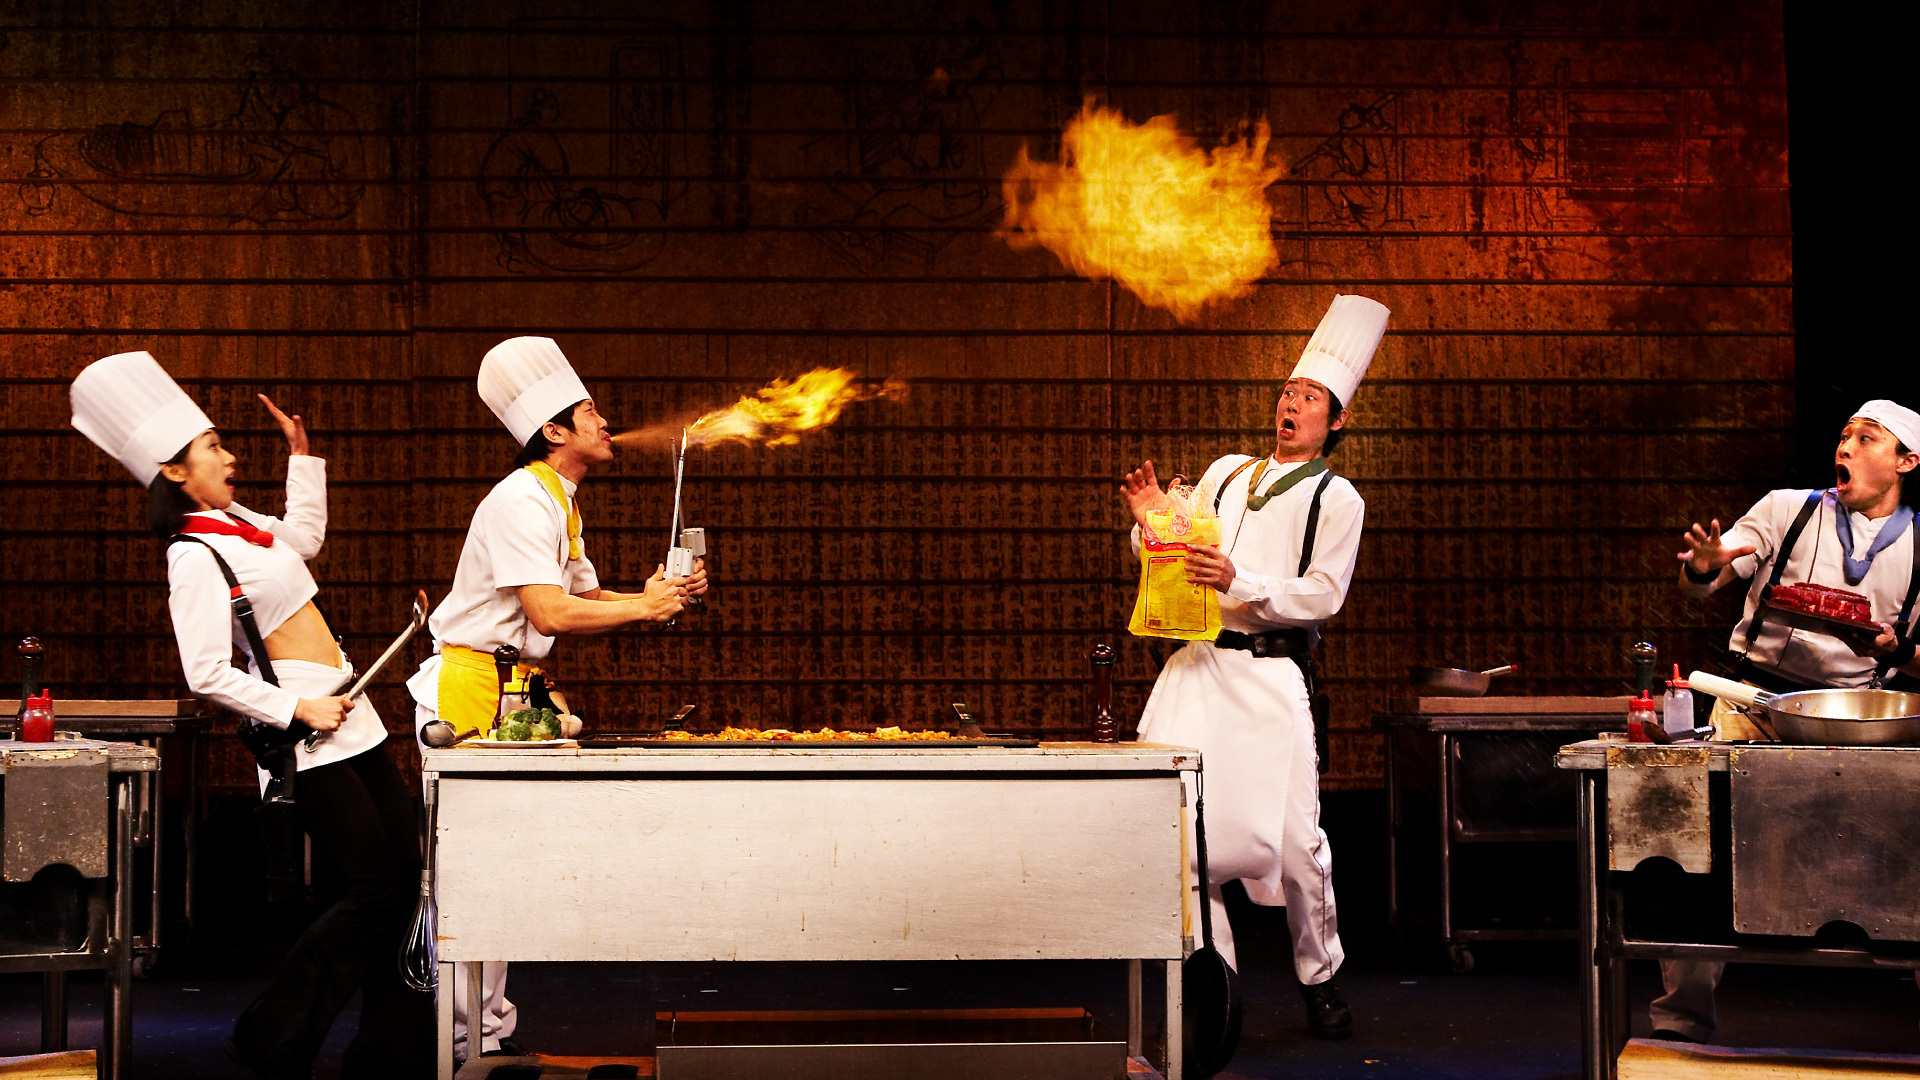 A chef breathes a cloud of fire; beside him, three surprised chefs recoil.